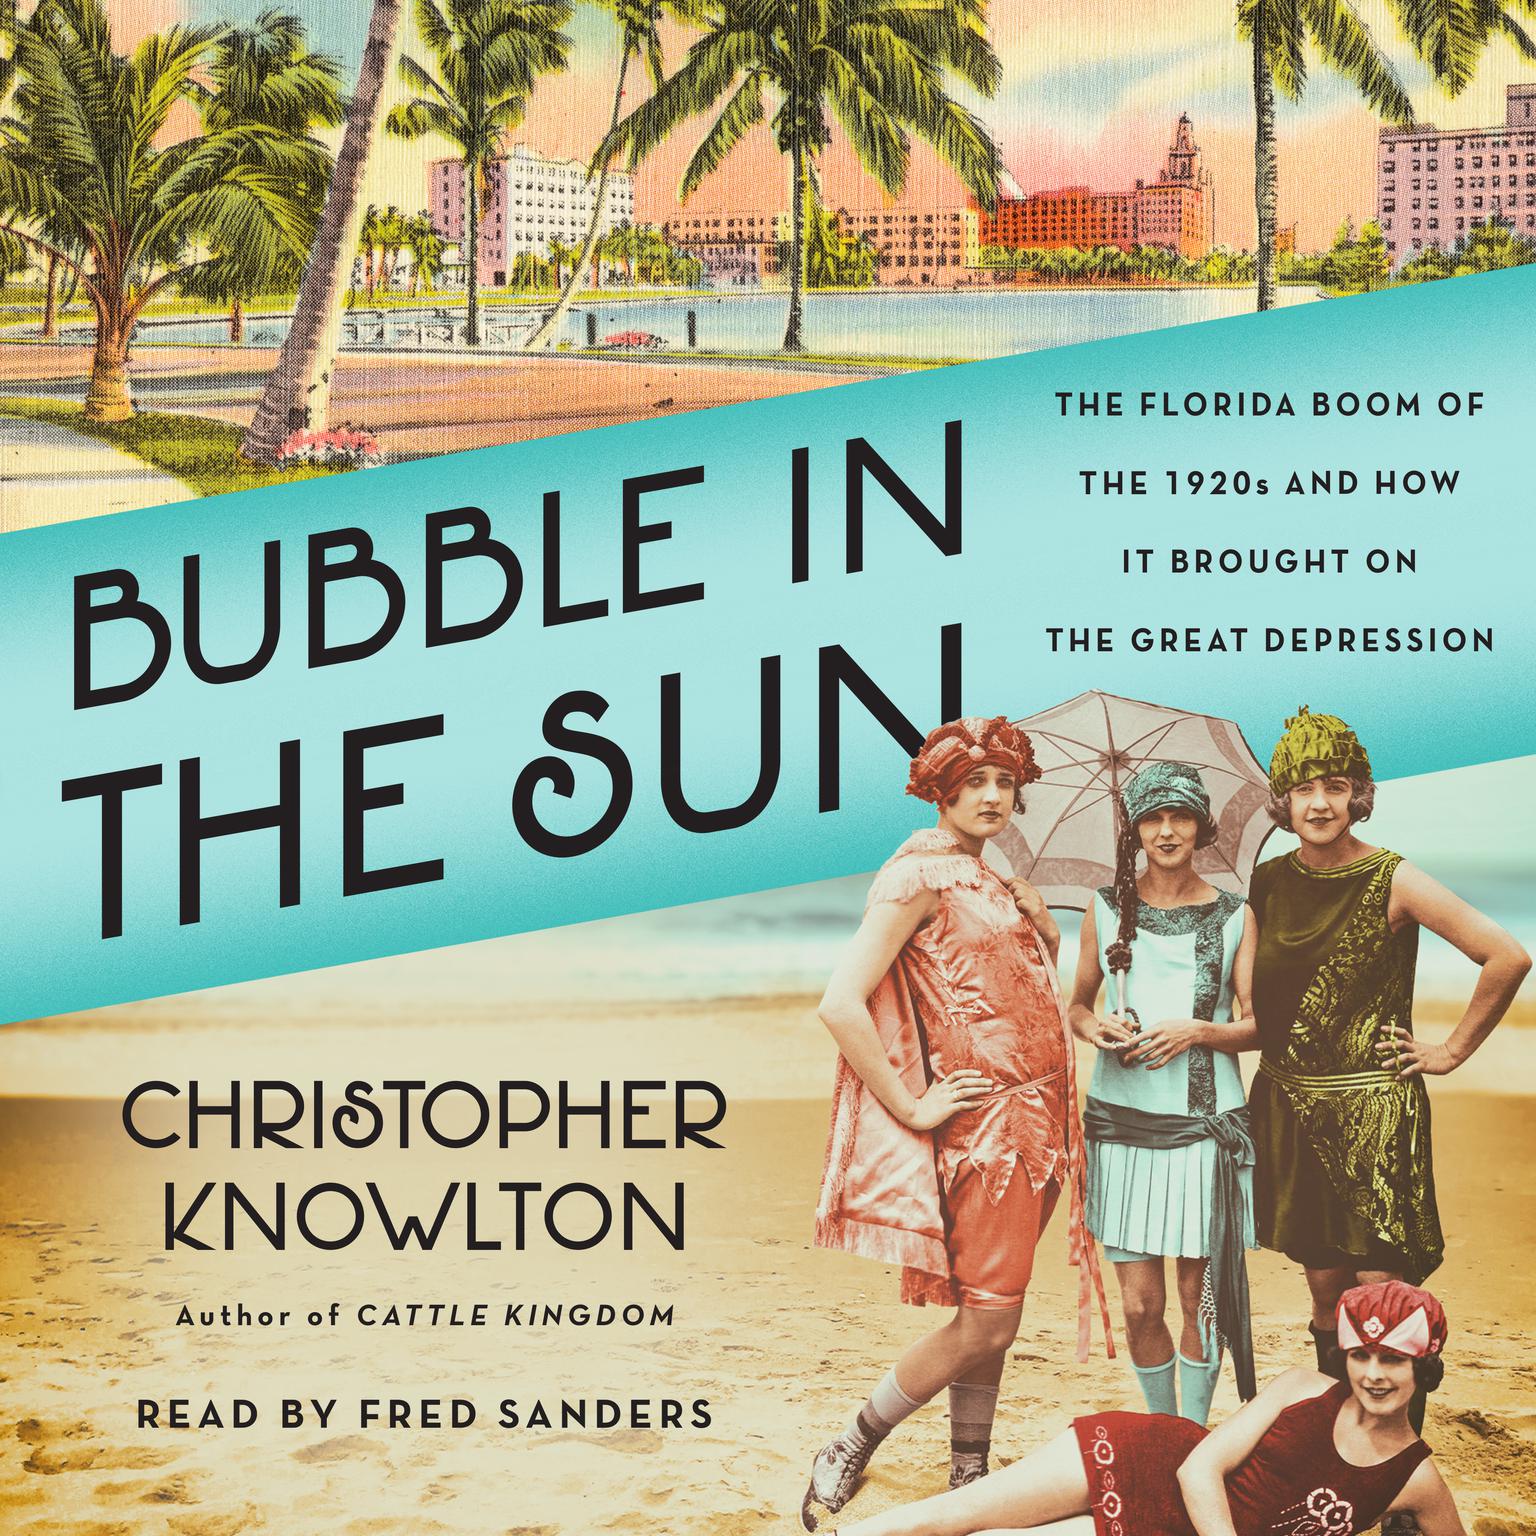 Bubble in the Sun: The Florida Boom of the 1920s and How It Brought on the Great Depression Audiobook, by Christopher Knowlton